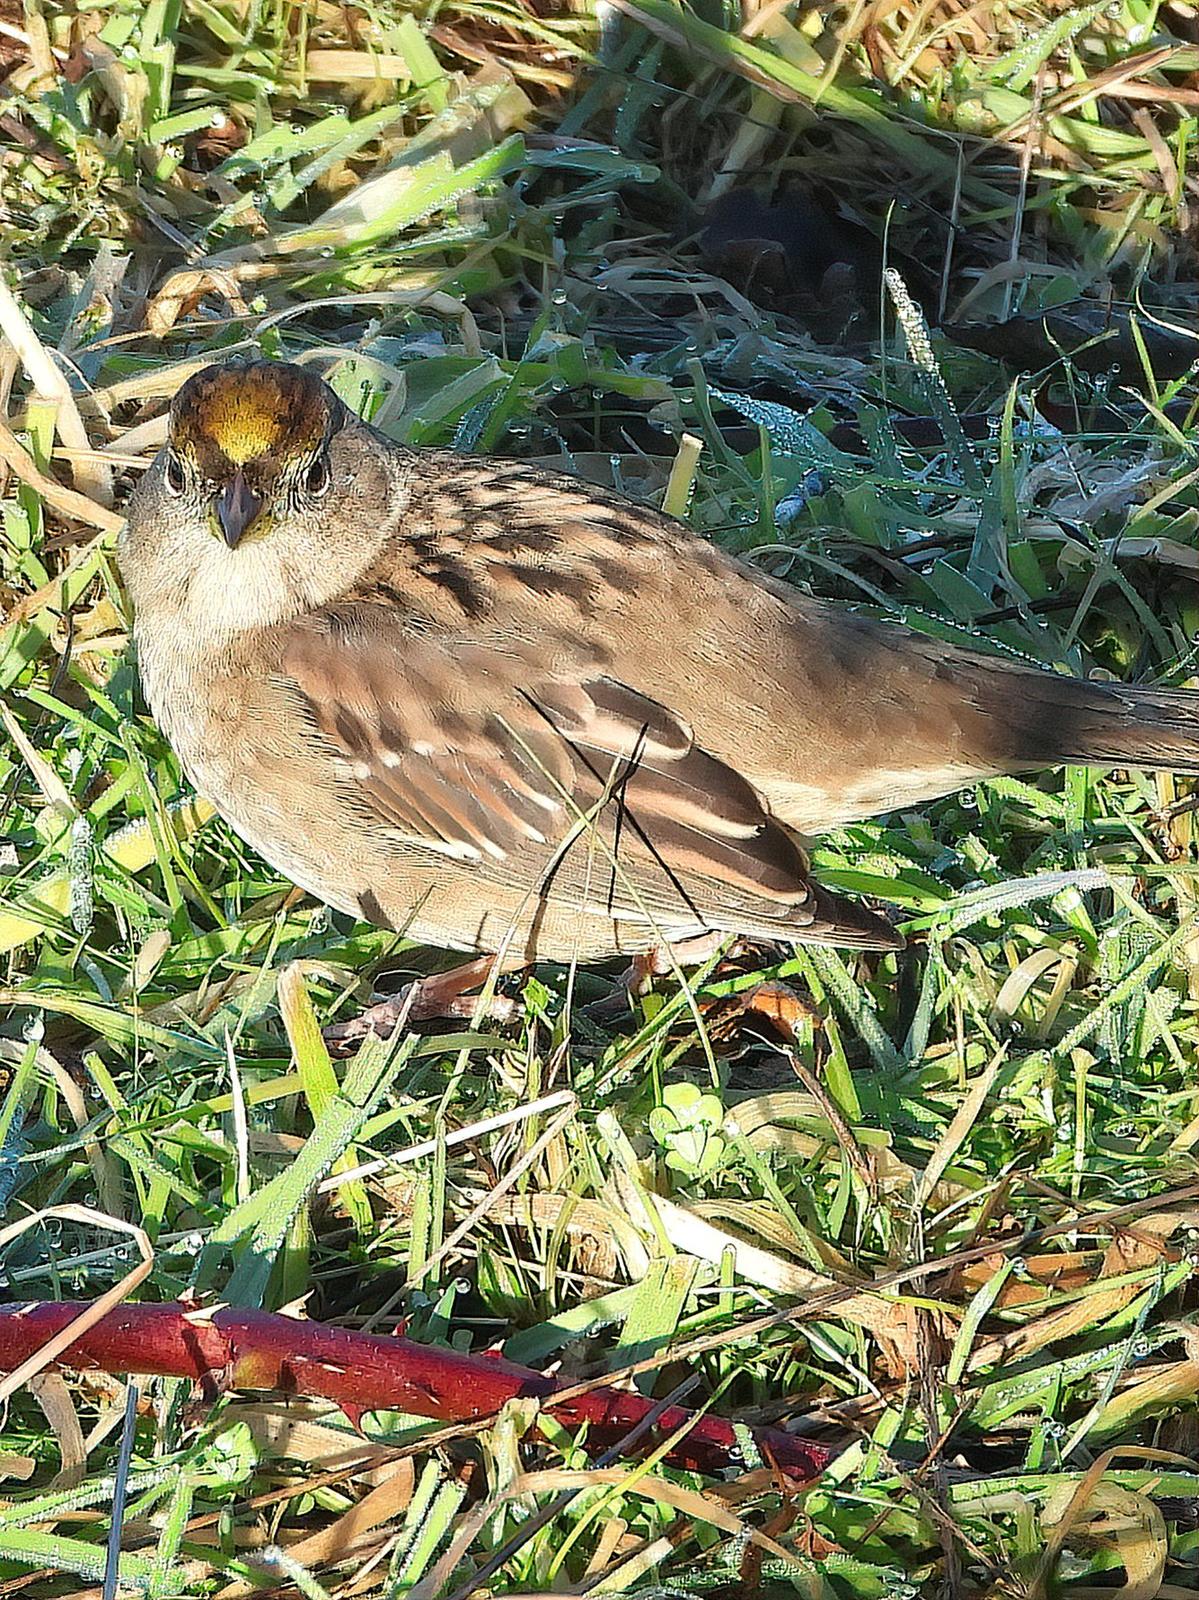 Golden-crowned Sparrow Photo by Dan Tallman